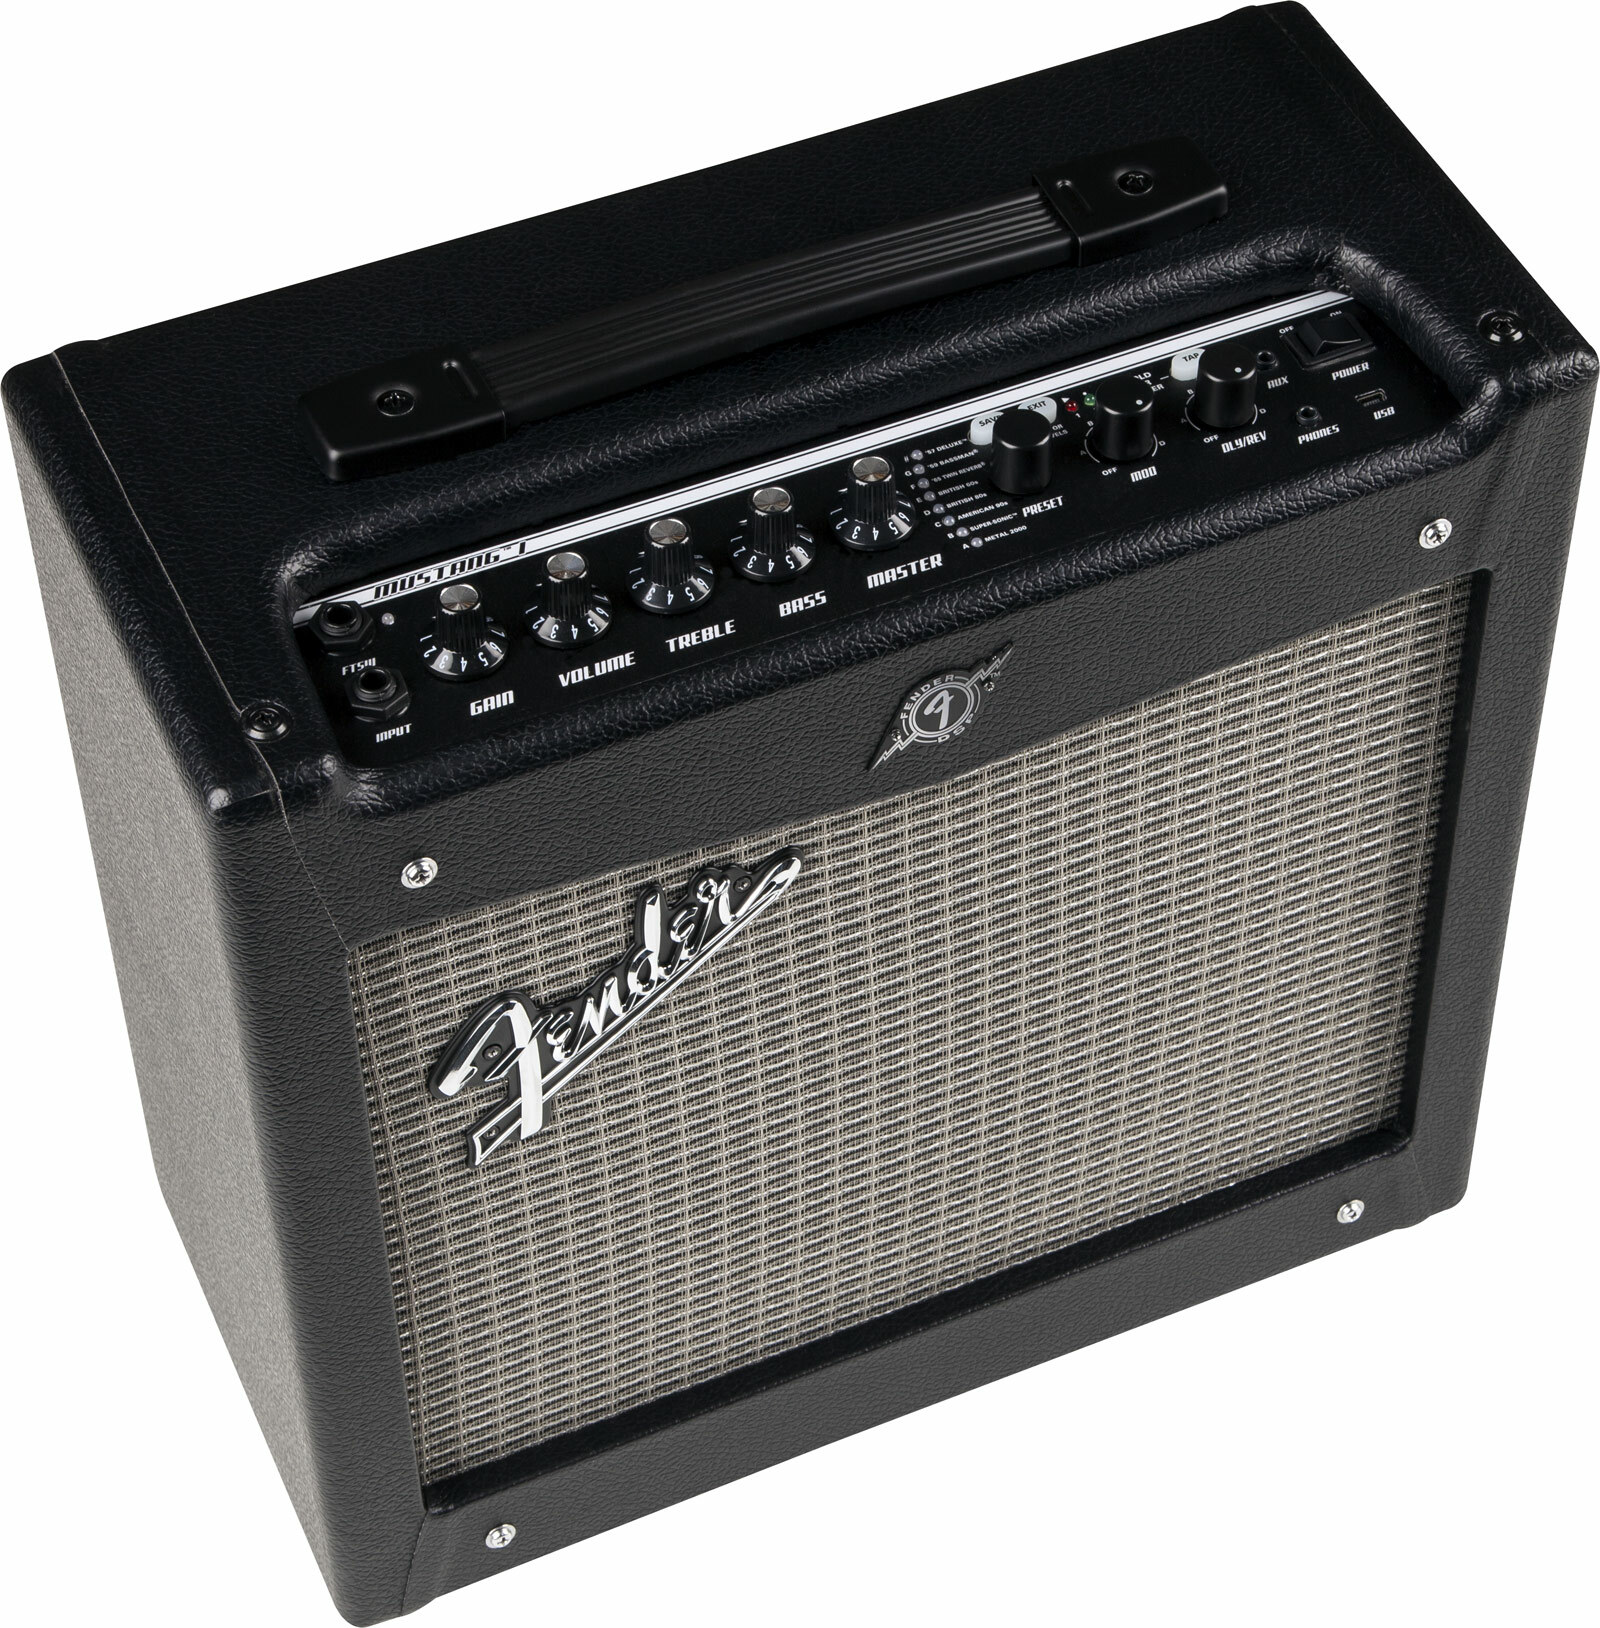 Fender Mustang I V2 20w 1x8 Black - Electric guitar combo amp - Main picture